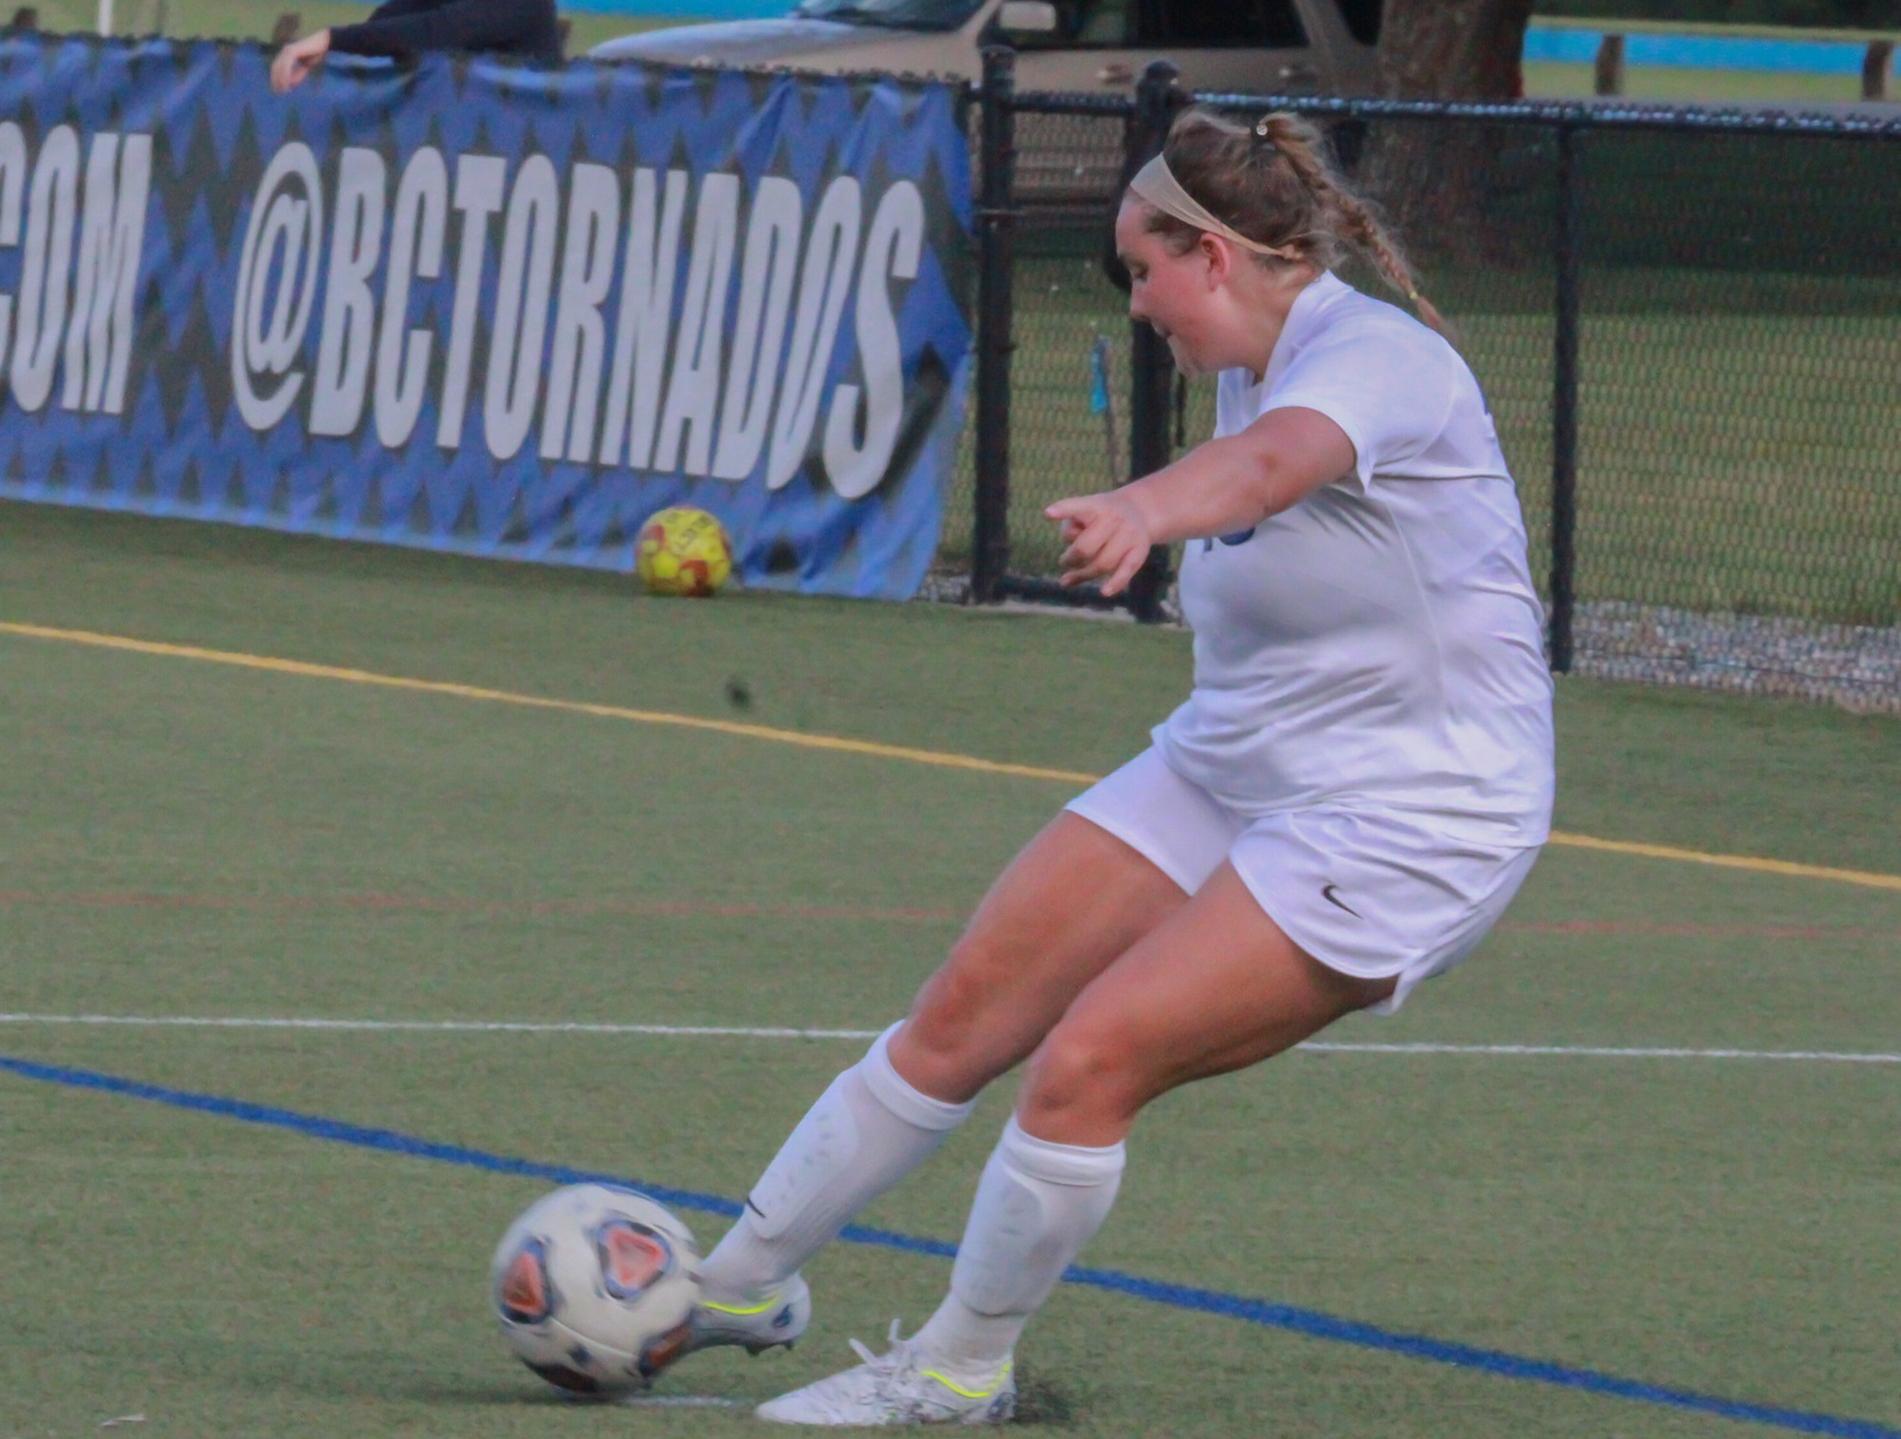 Brevard Wins Fourth-Straight with 2-0 Victory vs. Carlow